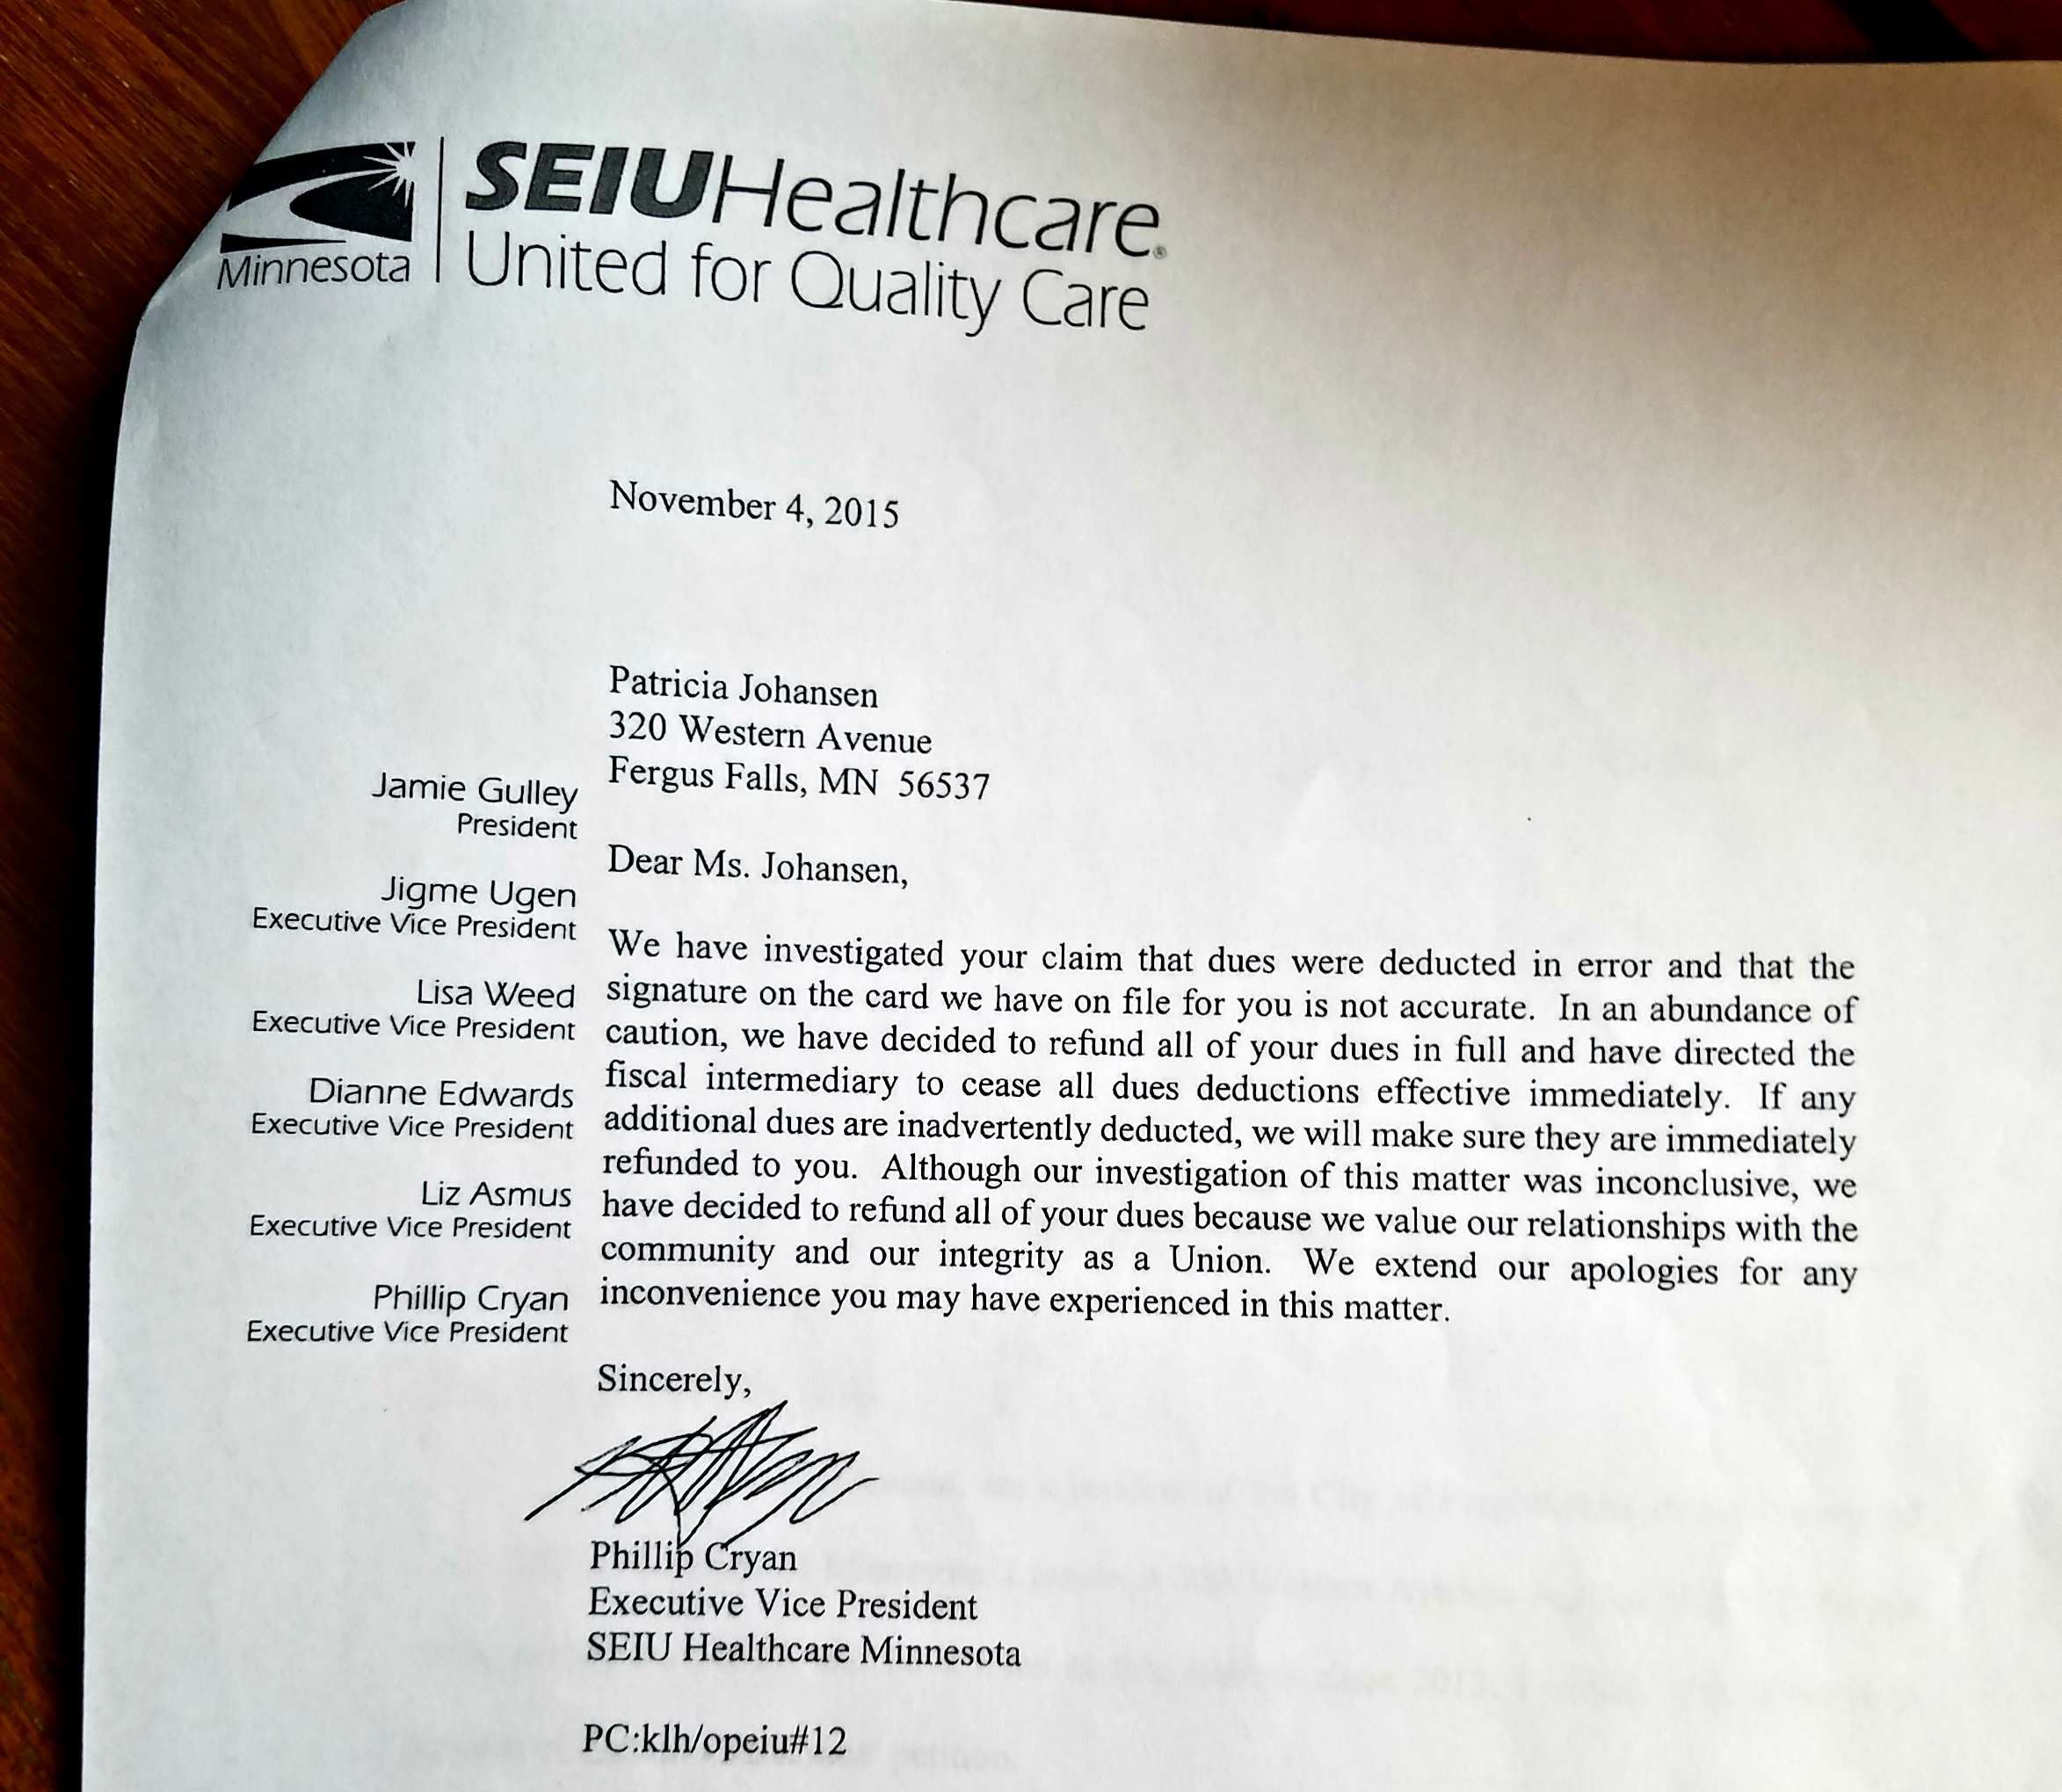 The letter from SEIU official Phillip Cryan to Patricia Johansen. (Photo: Kevin Mooney/The Daily Signal)